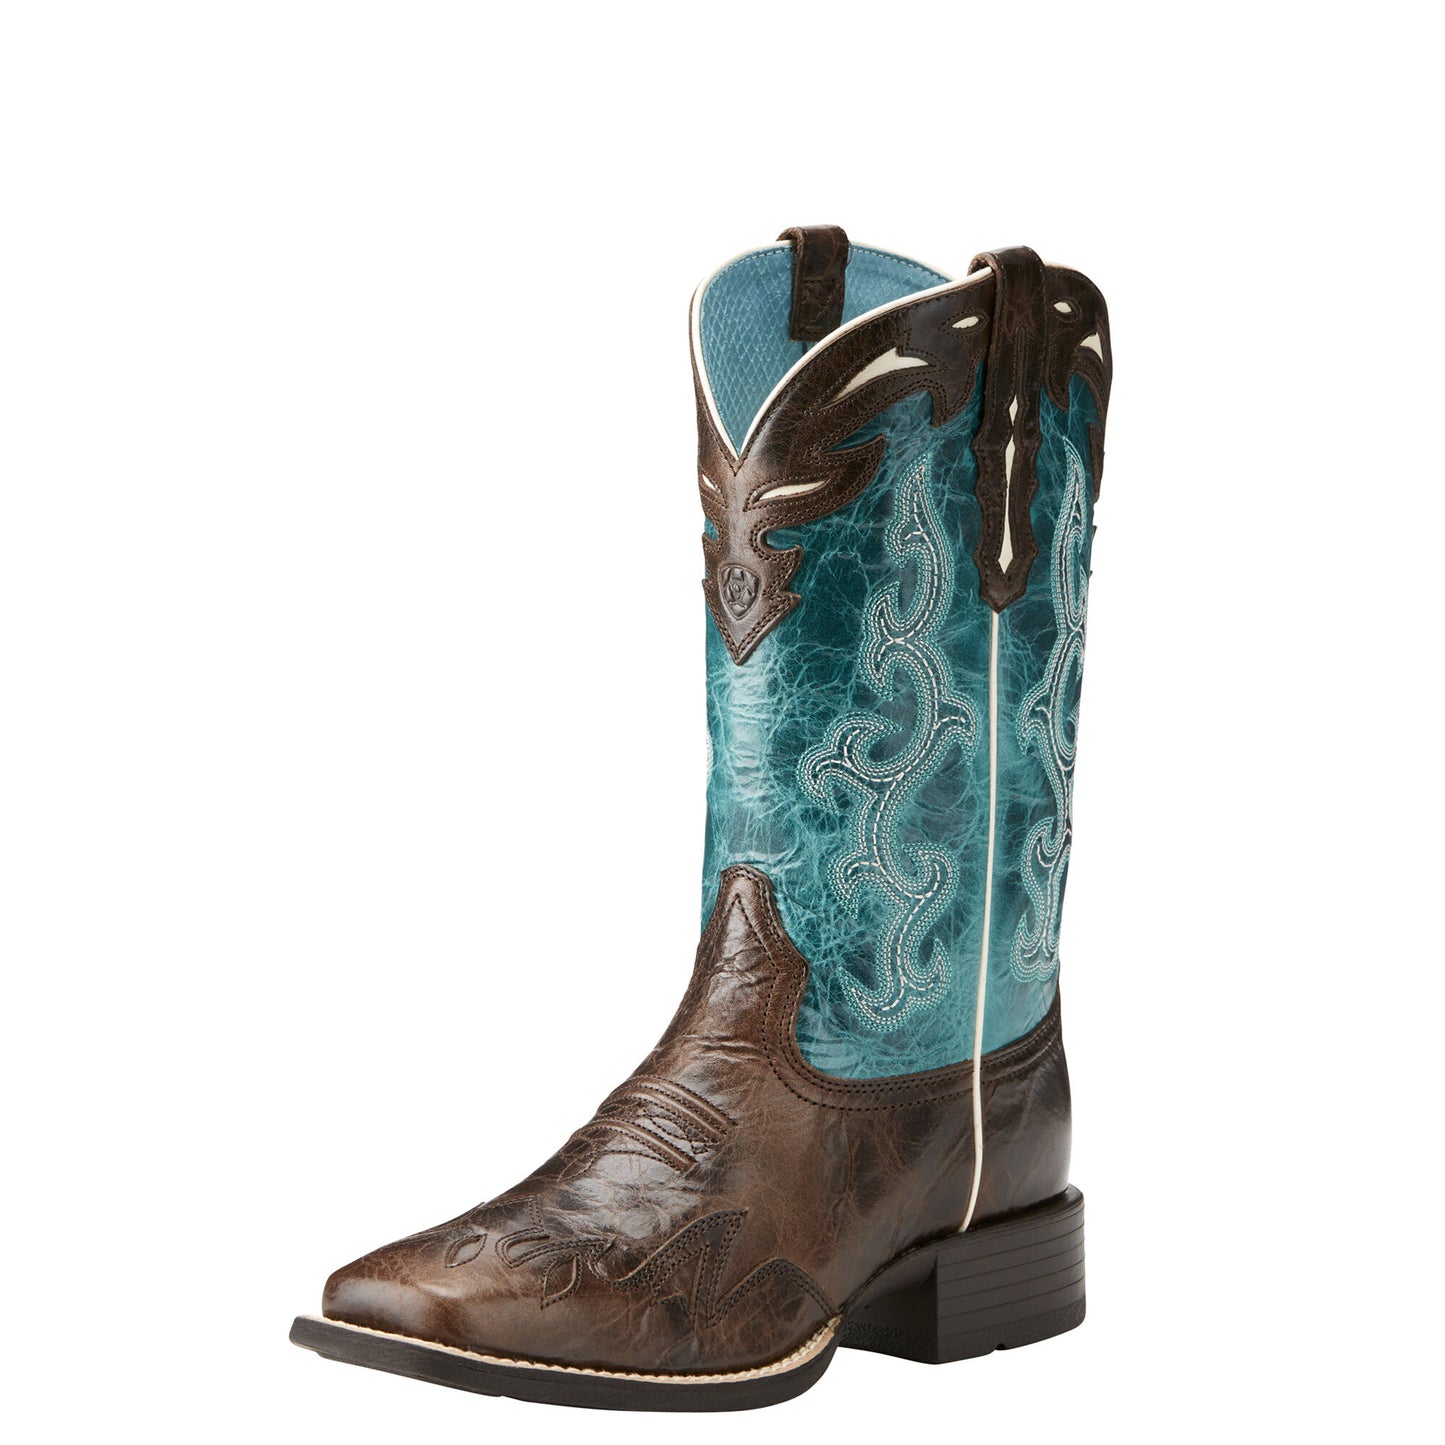 Ariat Women's Sidekick Boot - Chocolate Chip/Turquoise - French's Boots